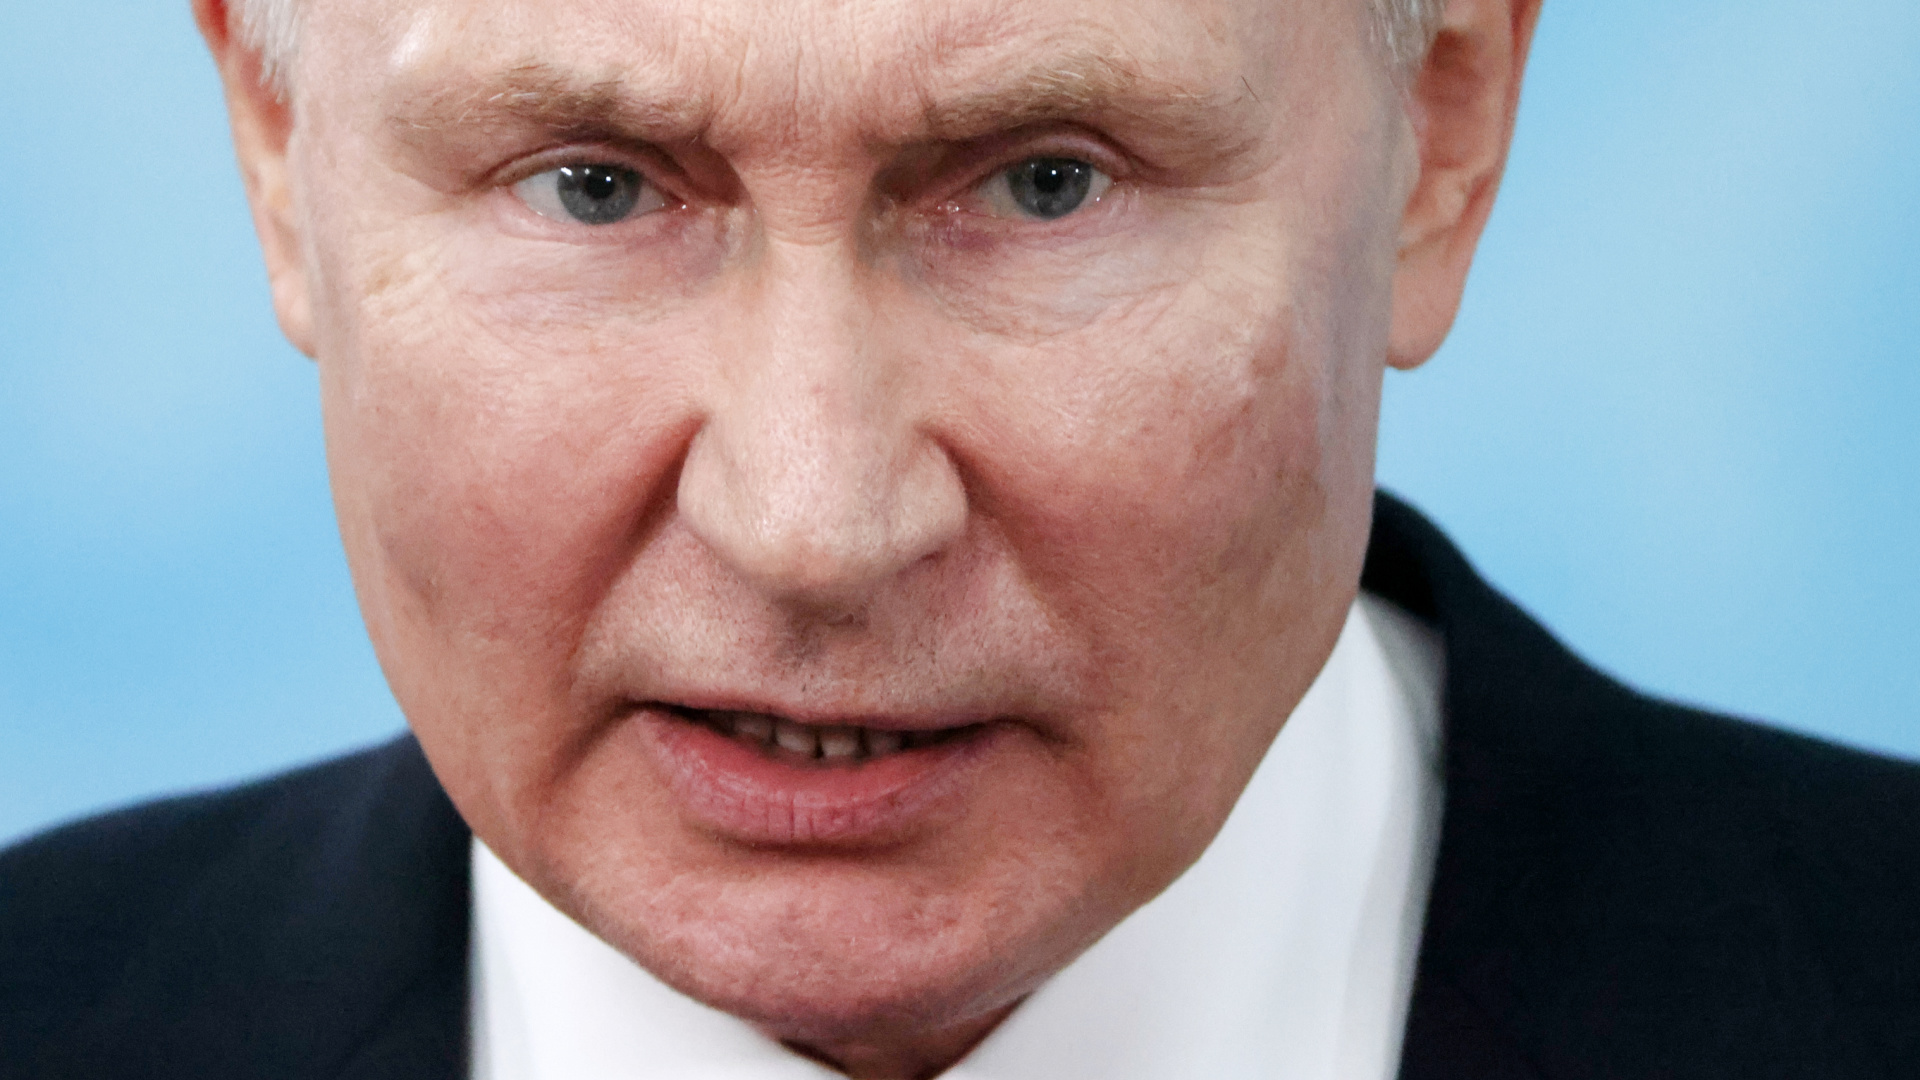 Did Putin's difficult childhood make him into a hardened man?